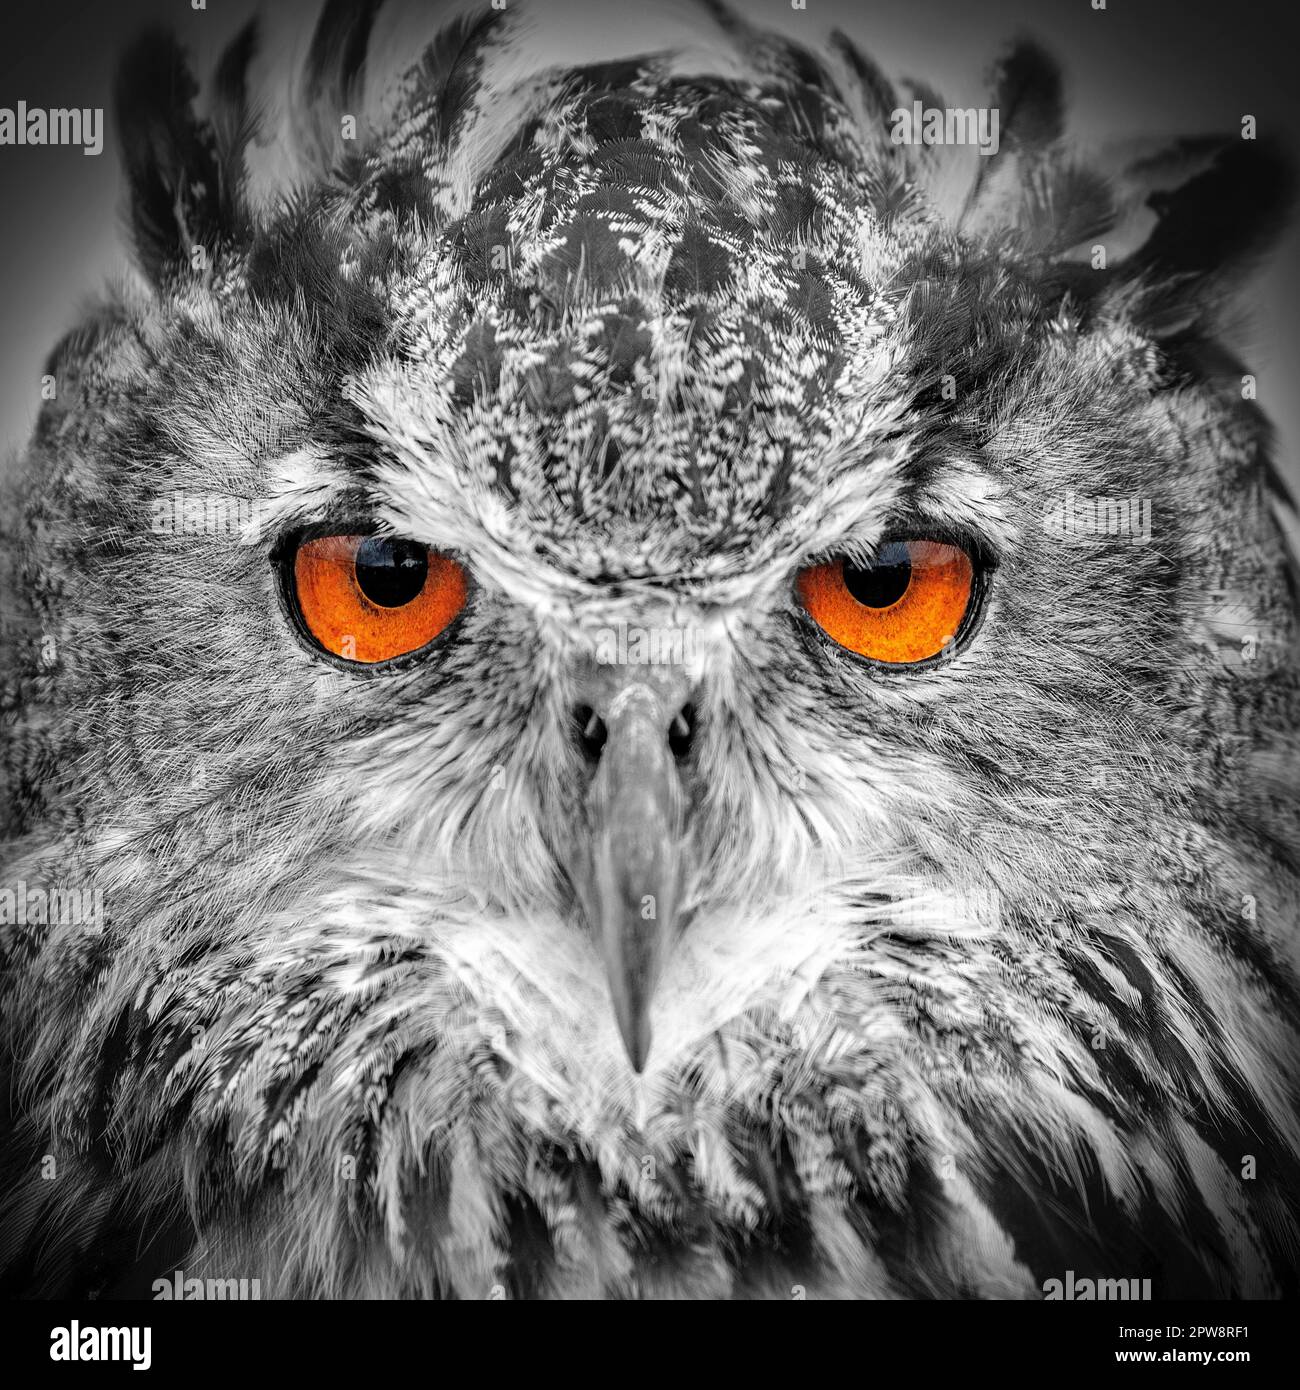 The Netherlands, Loosdrecht, Eagle-owl (Bubo bubo). Portrait. Controlled conditions. Black and White, Digitally altered. Stock Photo